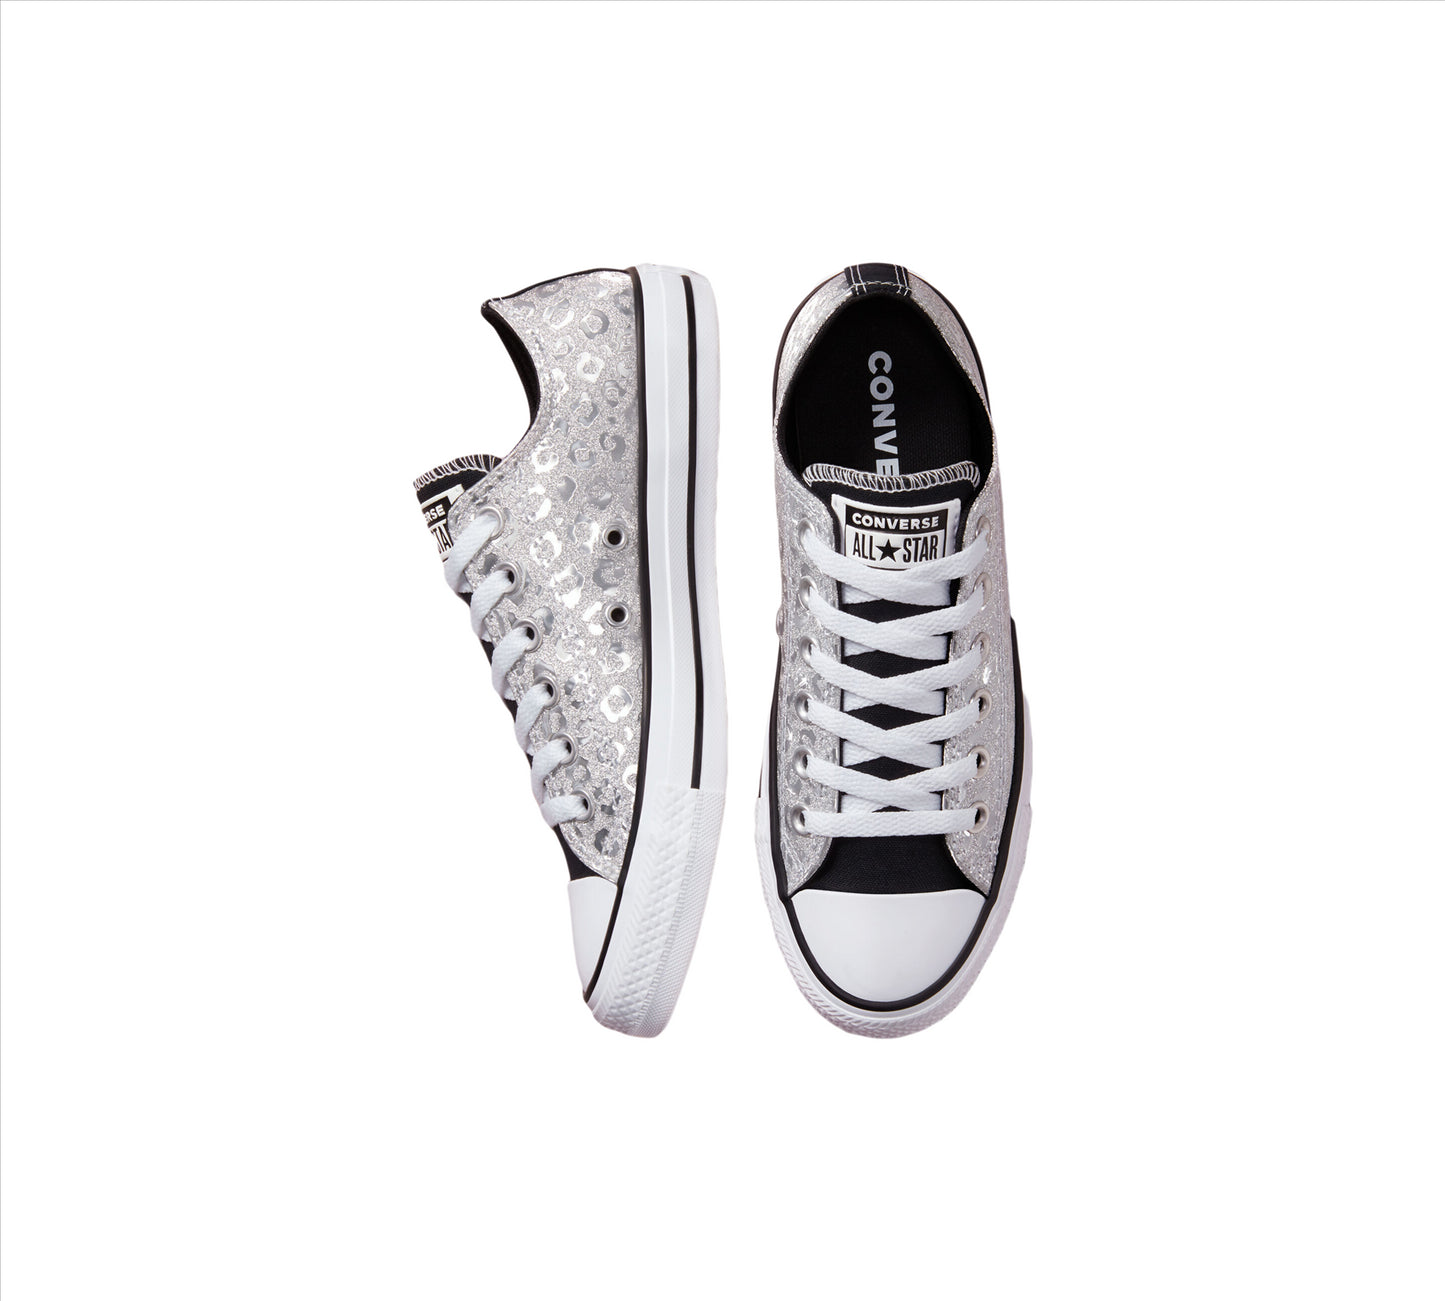 Converse Authentic Glam Chuck Taylor All Star 572042C Chaussures Argent/Blanc UK 3-8